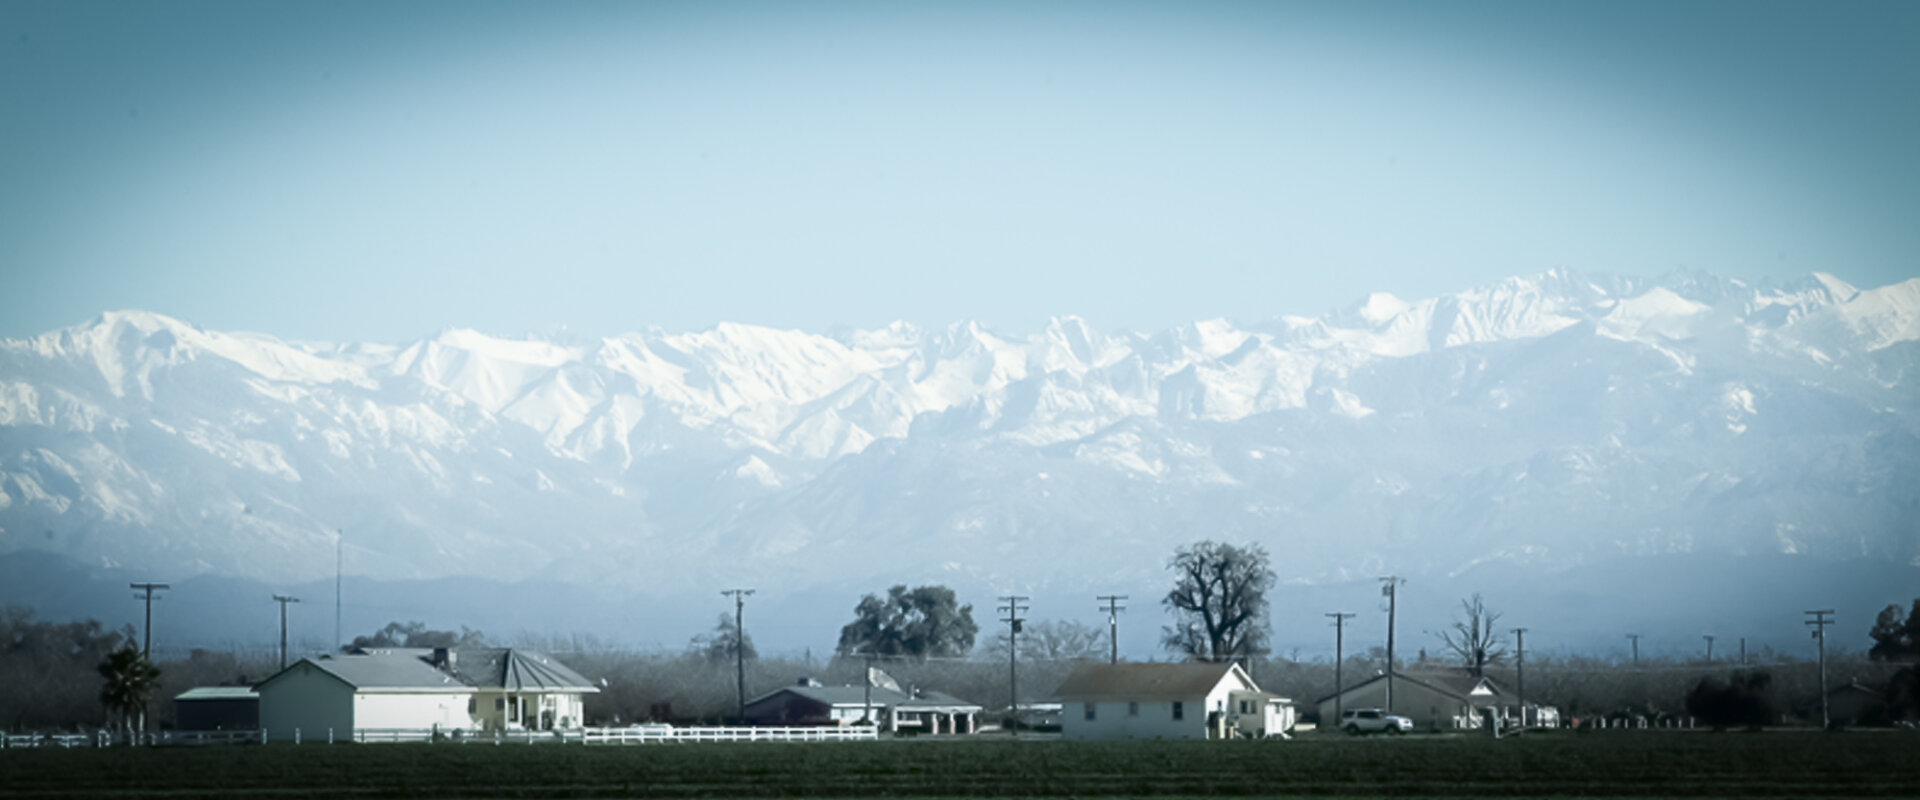 VIEW OF THE SIERRA NEVADA MOUNTAINS